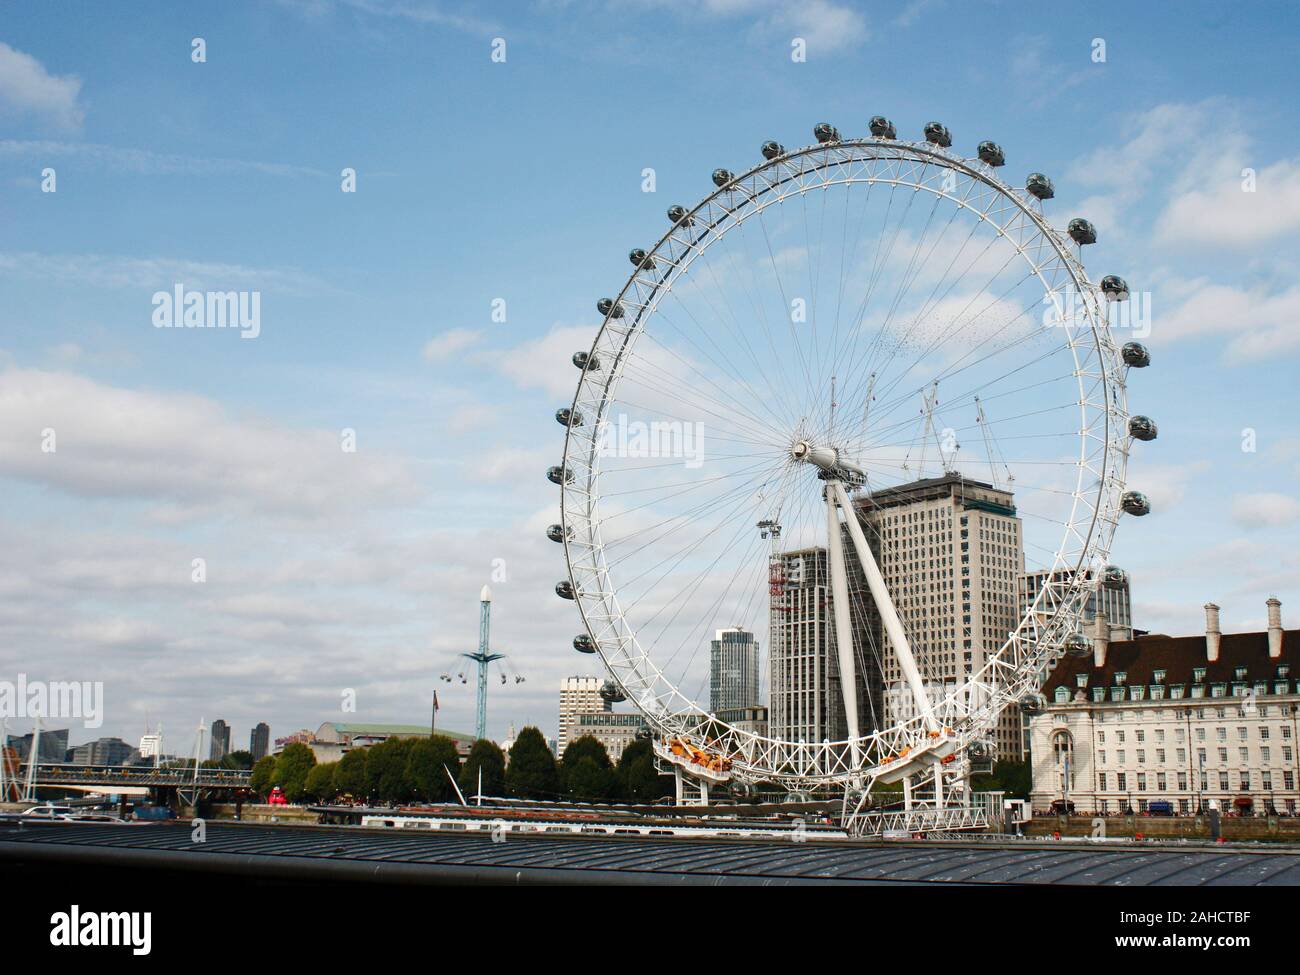 The London Eye, a giant ferris wheel in London and tallest cantilevered observation wheel Stock Photo